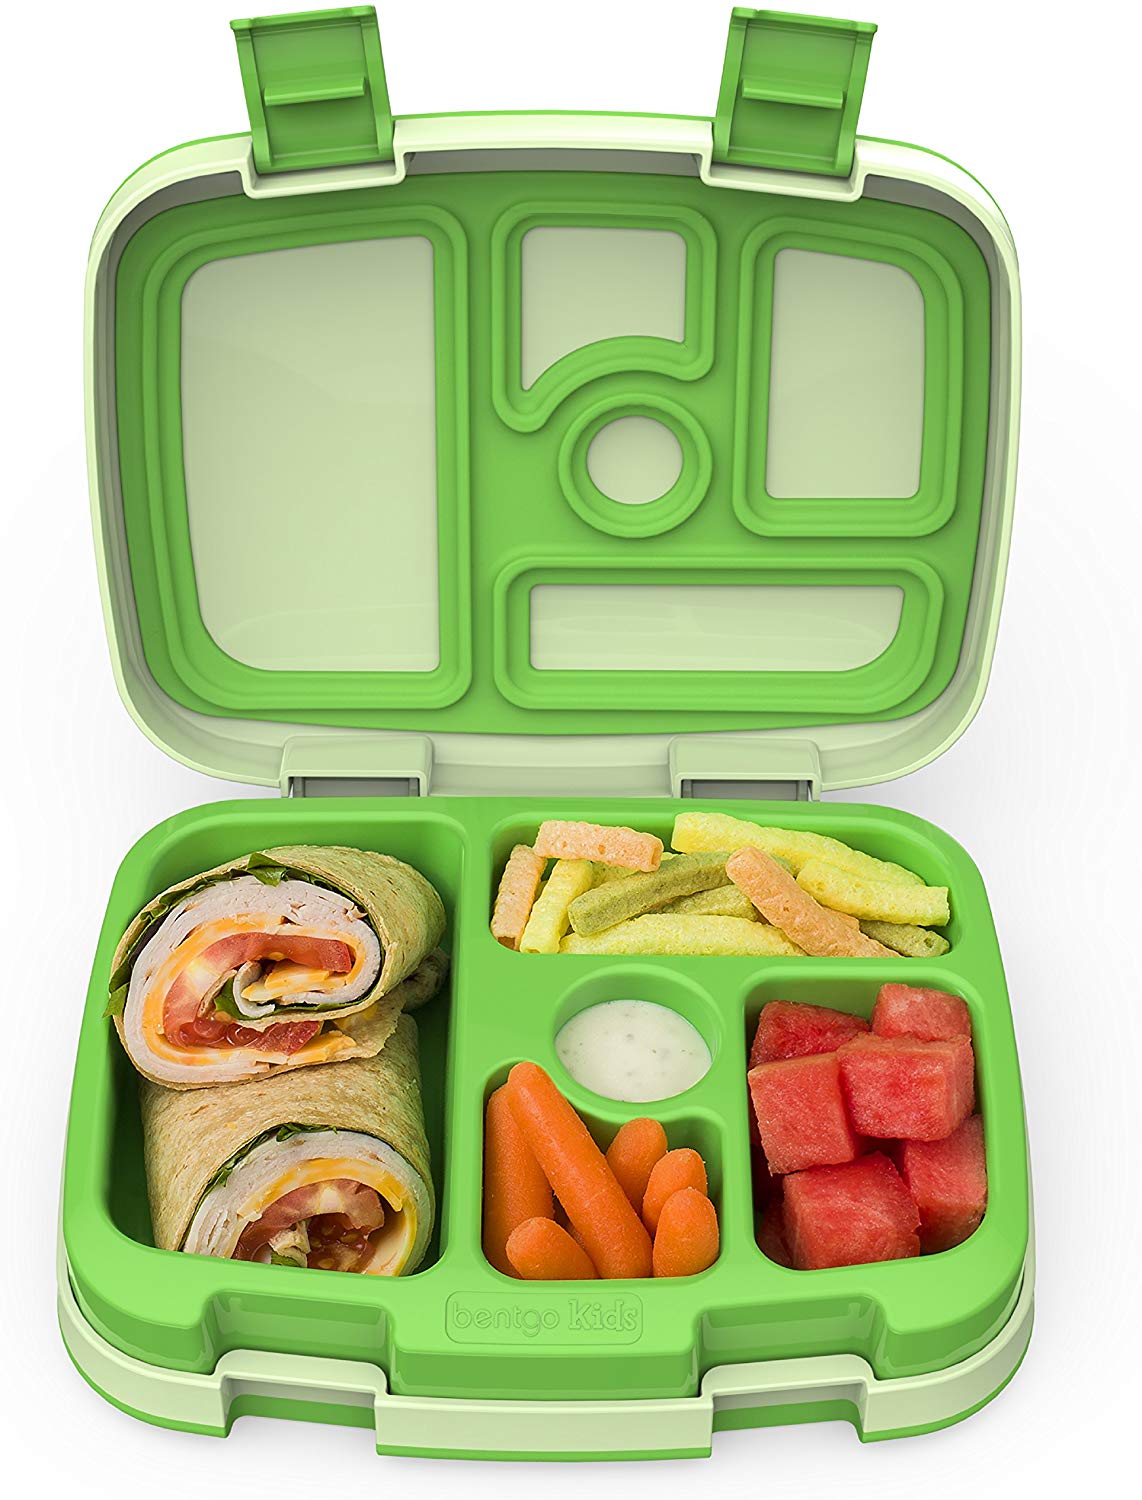 Bentgo Classic All-in-One Stackable Bento Lunch Box Containers in 8 Color  Options - Couponing with Rachel